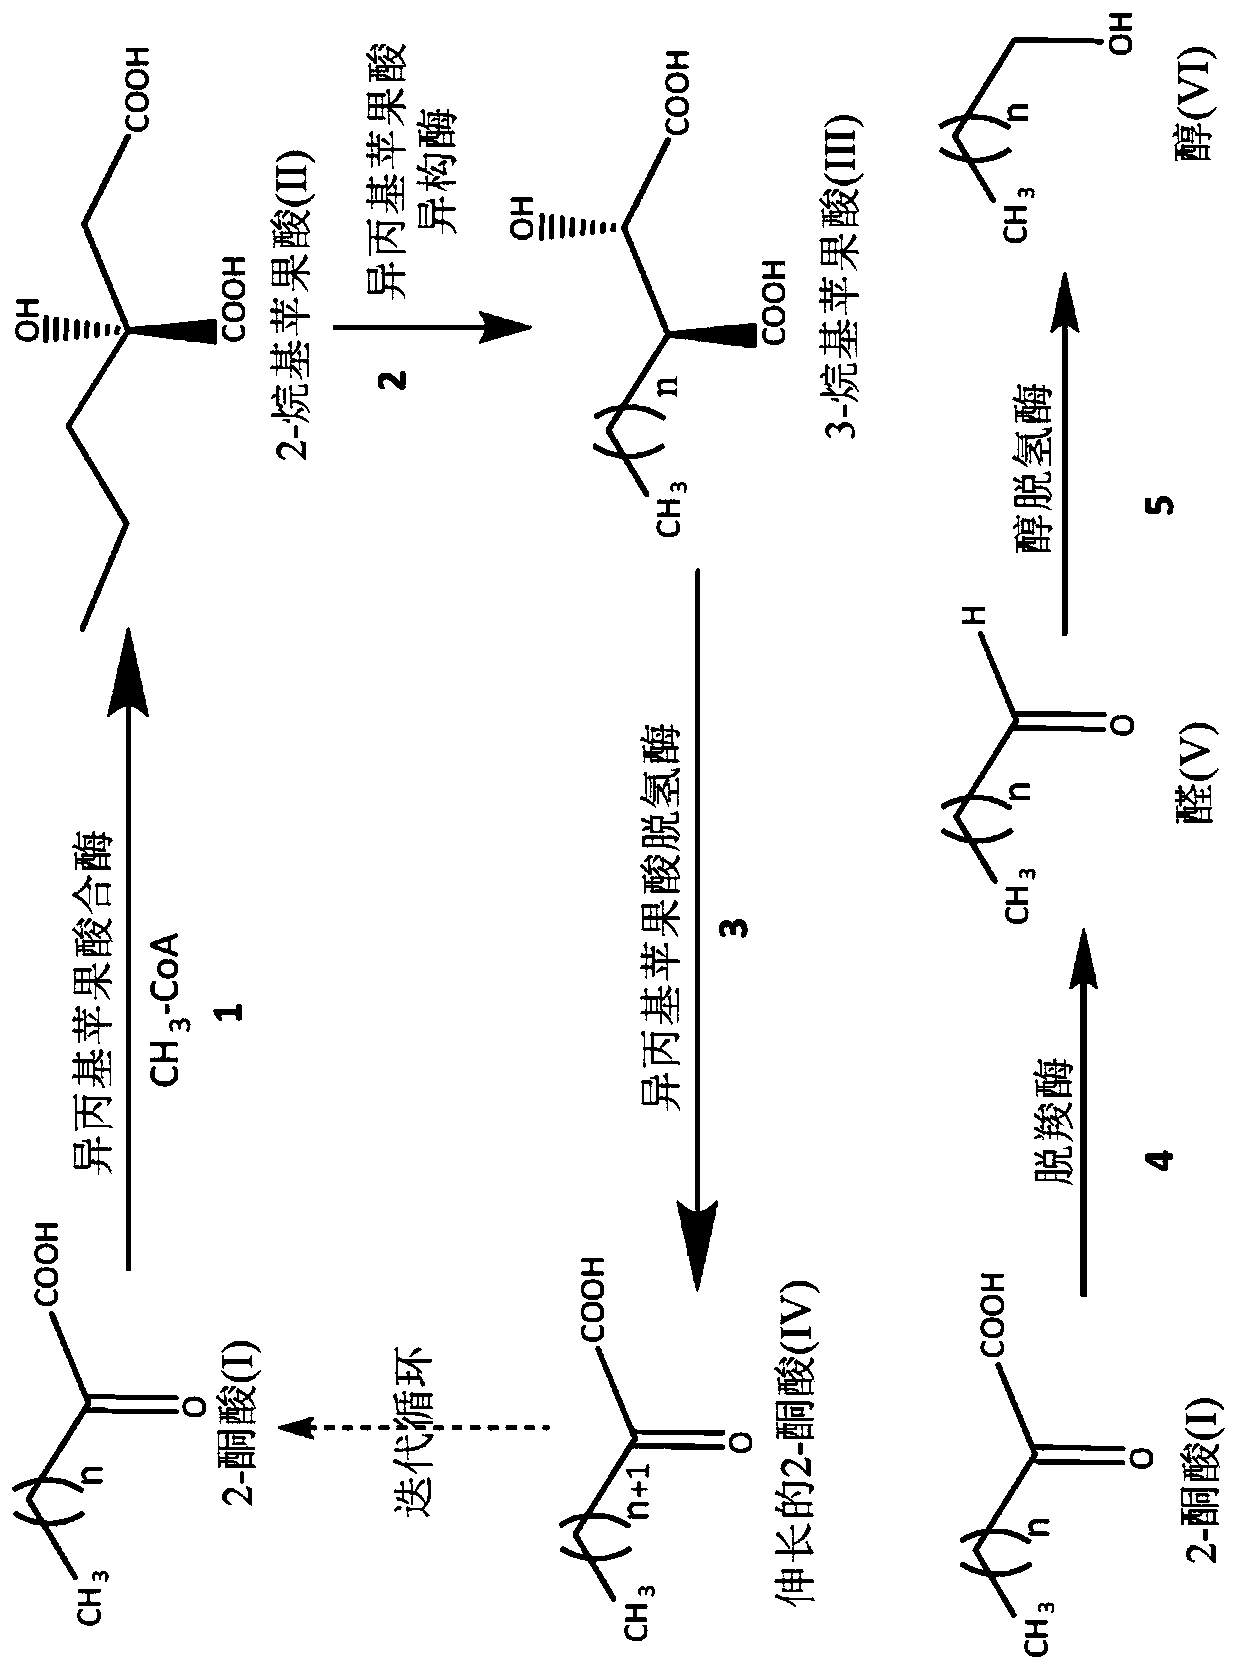 Processes to prepare elongated 2-ketoacids and C5-C10 compounds therefrom via genetic modifications to microbial metabolic pathways